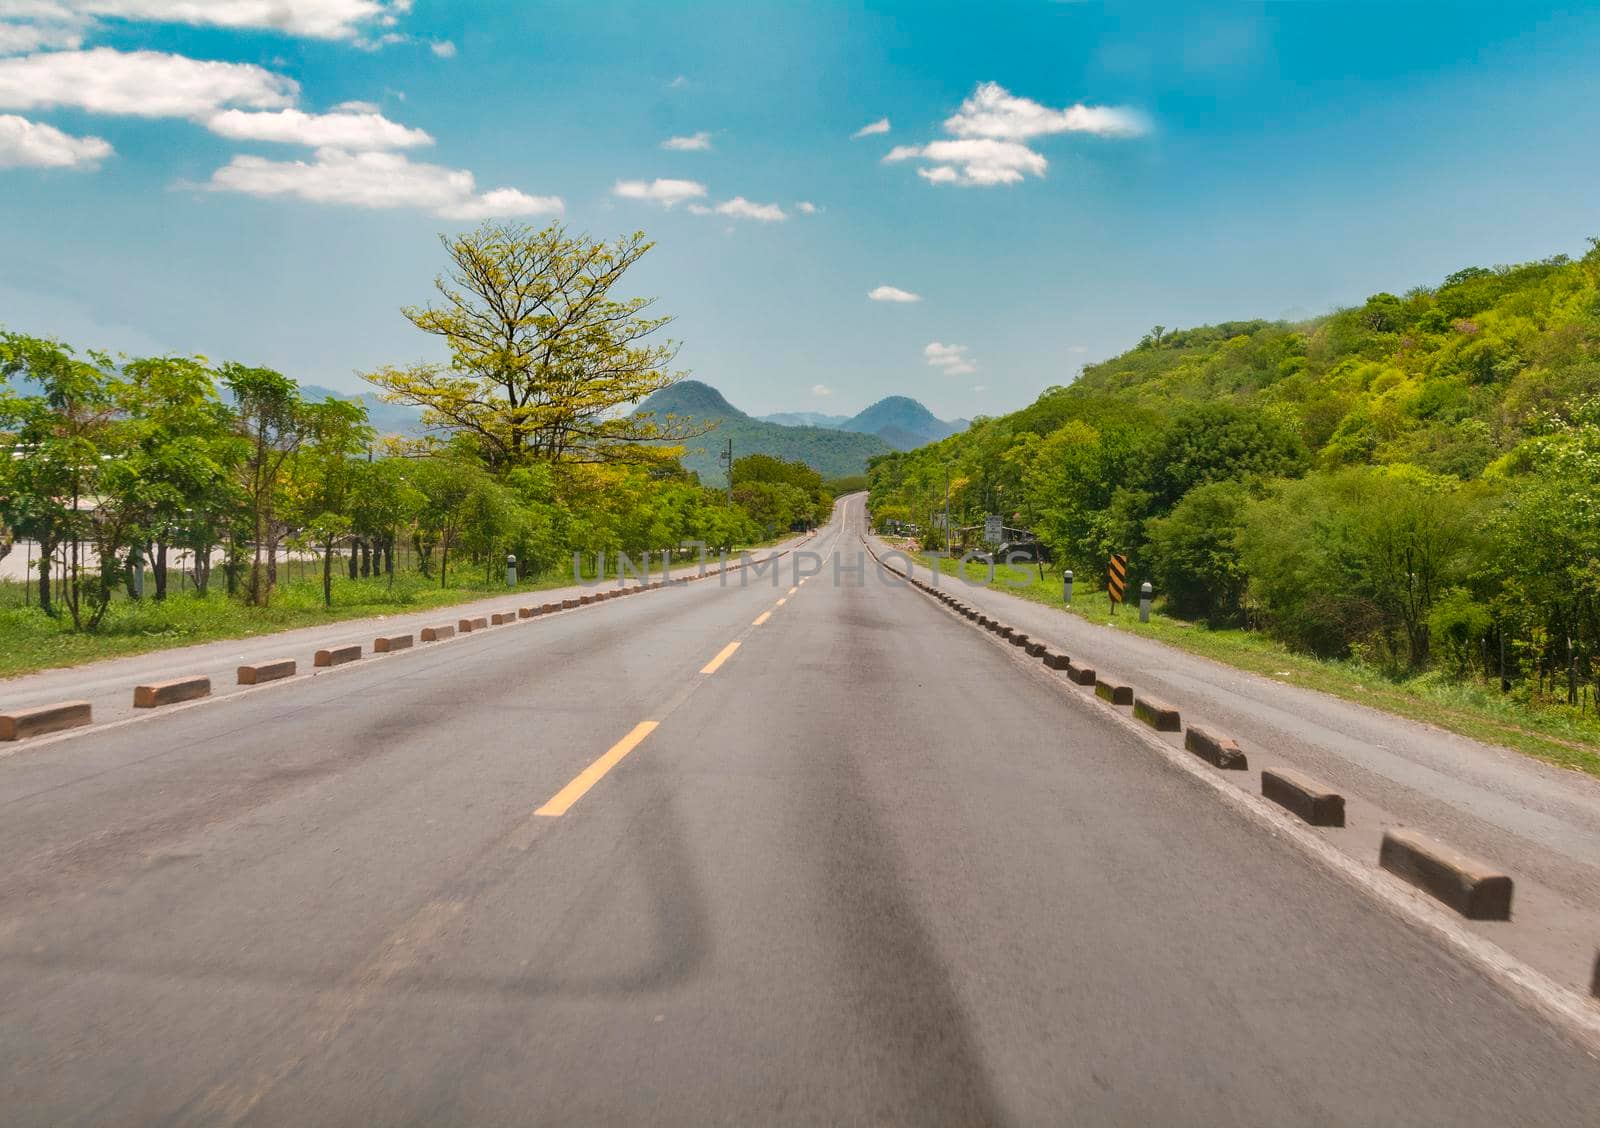 Asphalt road surrounded by greenery on a sunny day, Long asphalt road leading to a mountain with blue sky, Beautiful road on a sunny day leading to some mountains